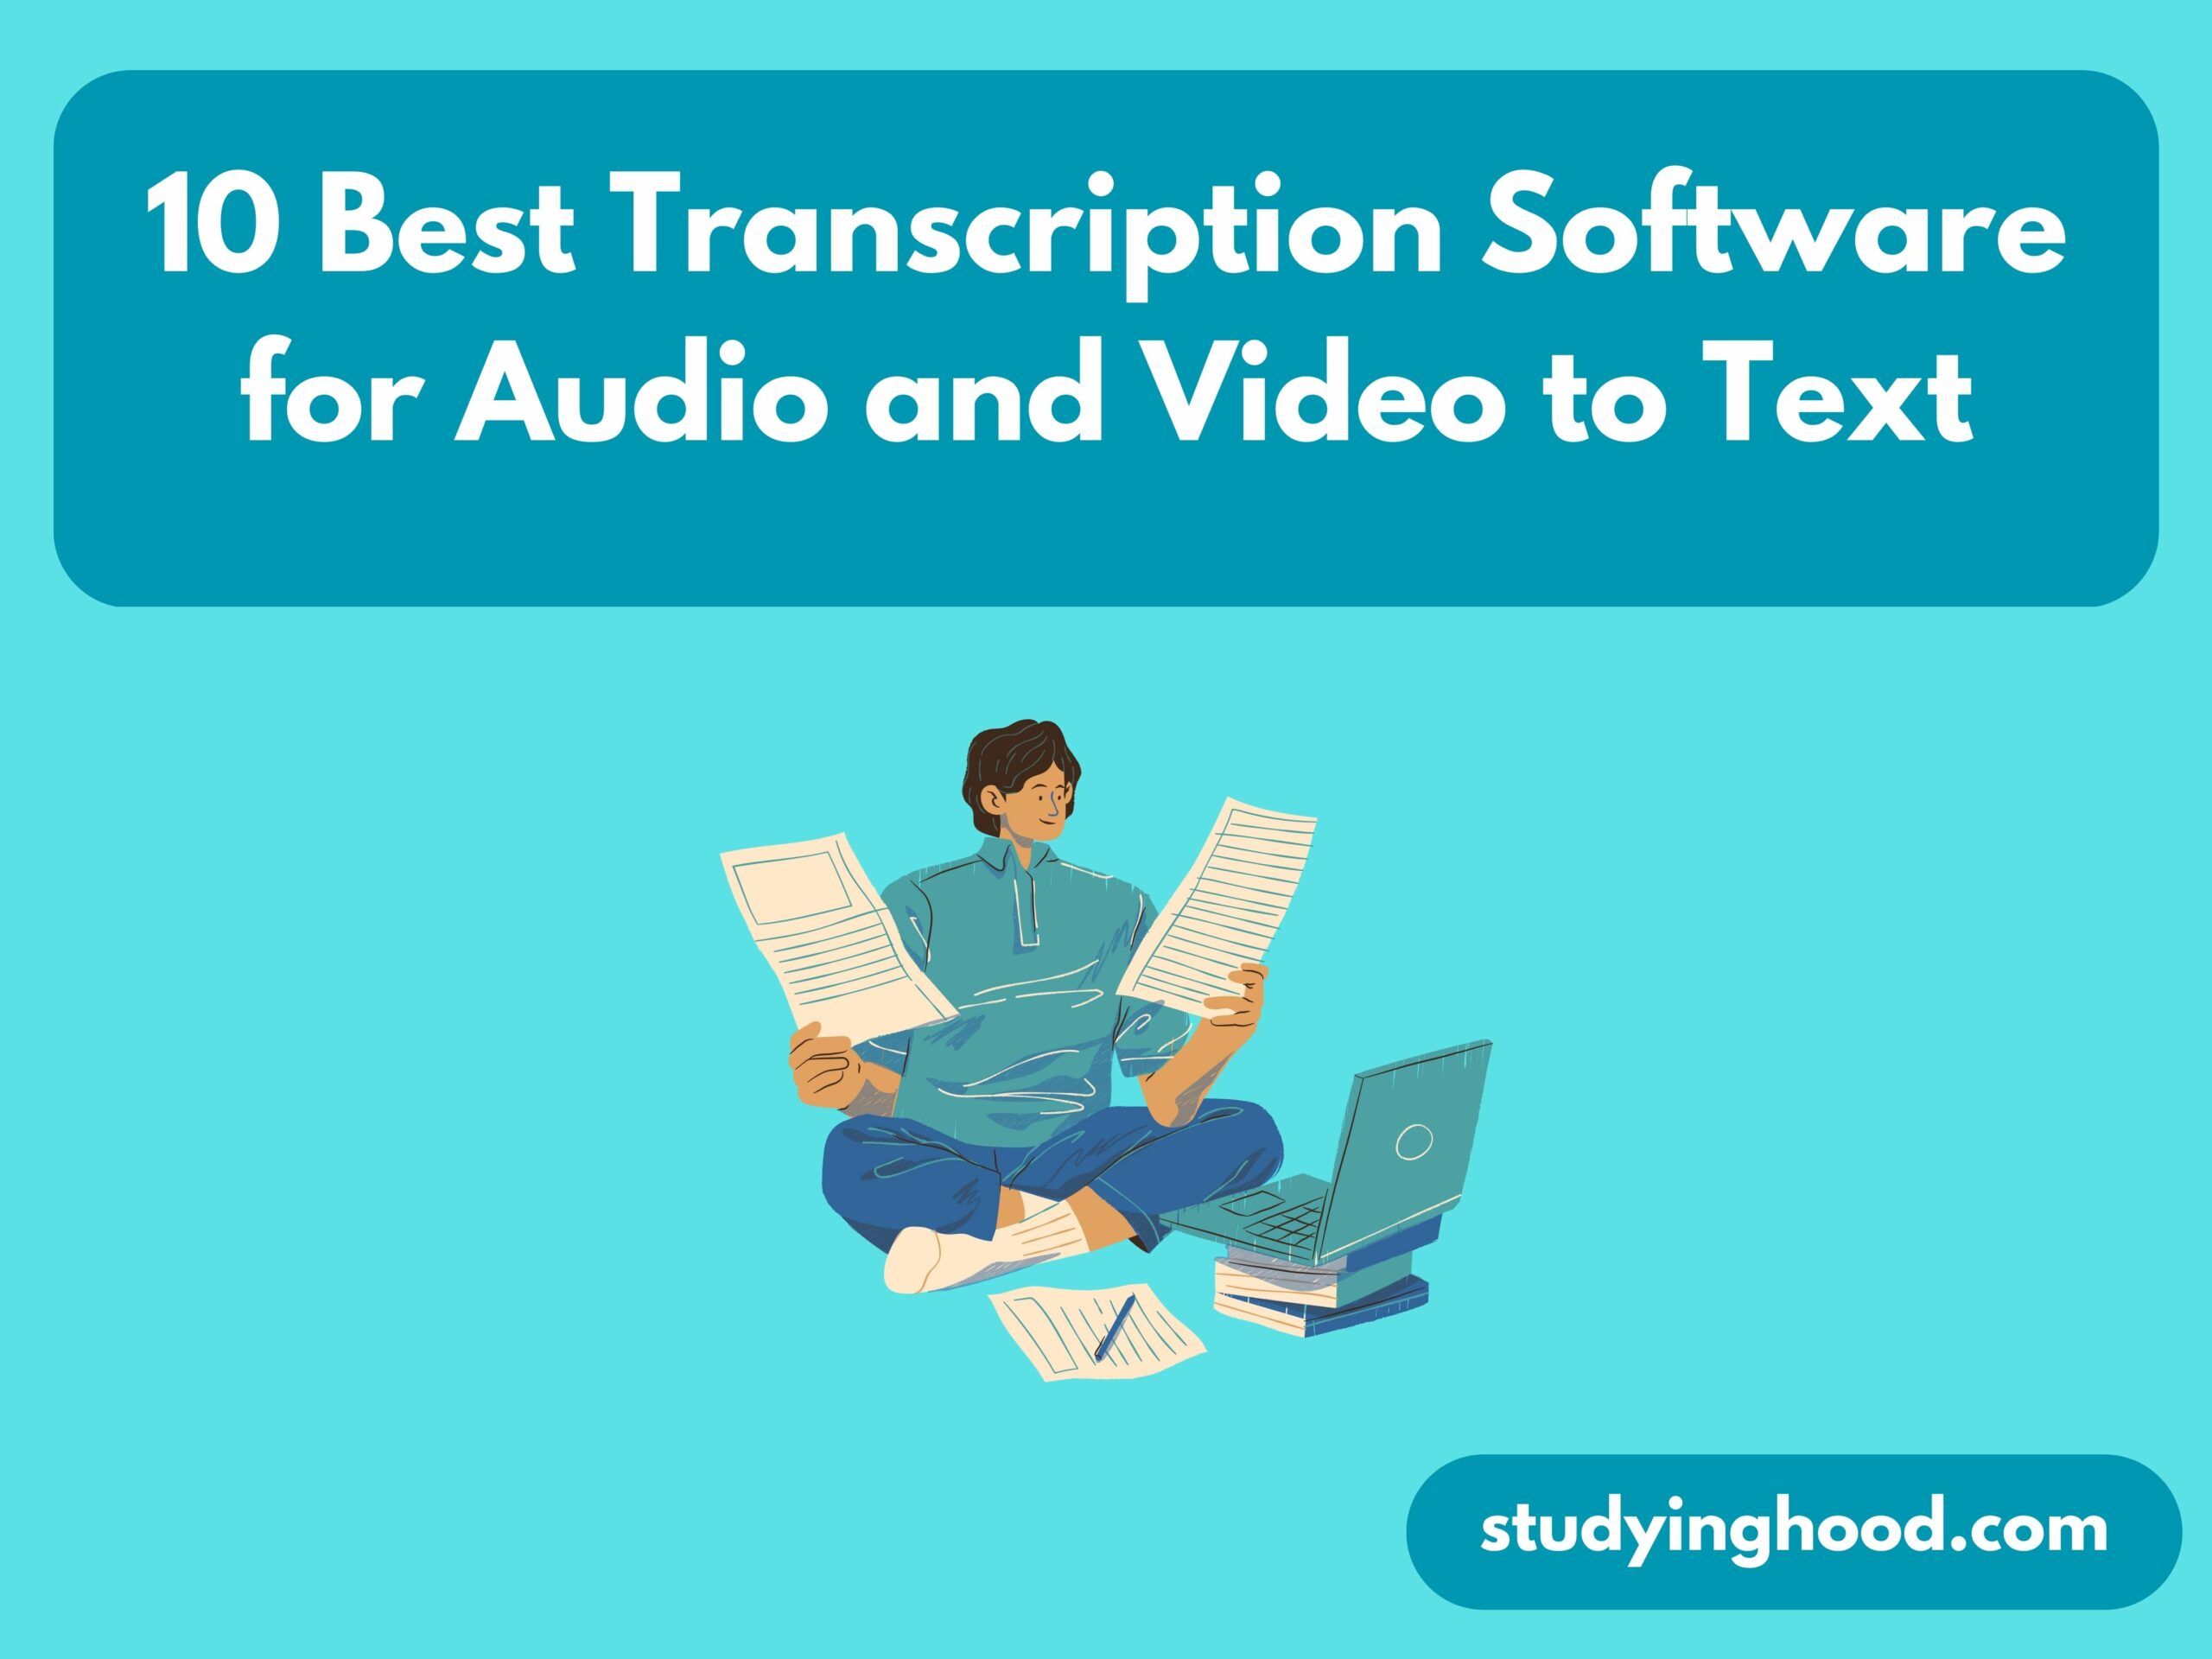 10 Best Transcription Software for Audio and Video to Text